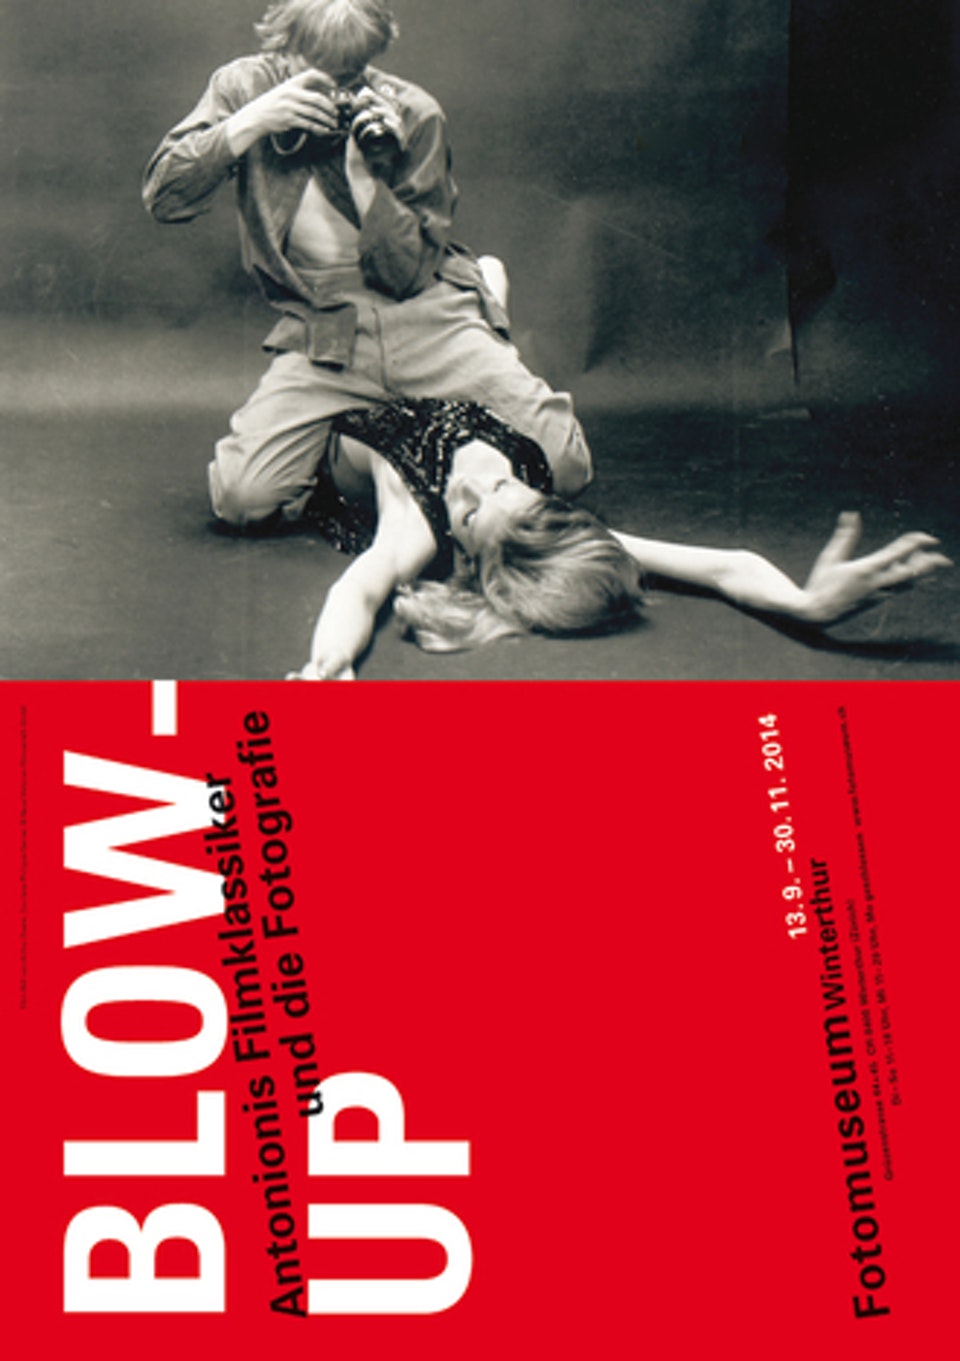 'Blow-Up: Antonioni's Film Classic and Photography' at the Albertina, Vienna